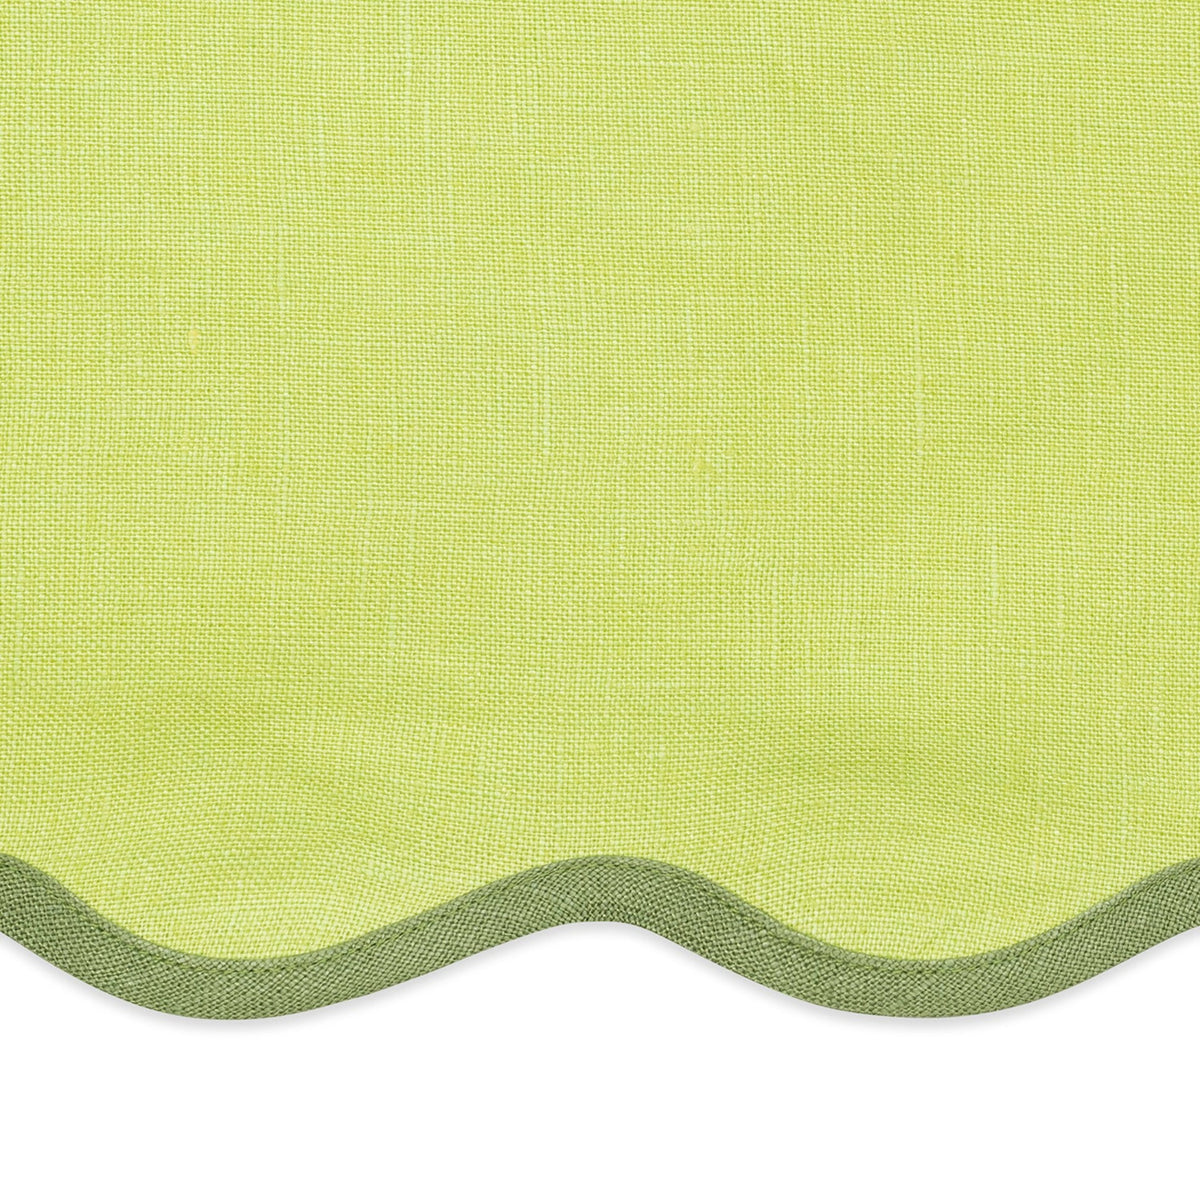 Swatch Sample of Matouk Scallop Edge Table Linens in Peridot/Grass Color